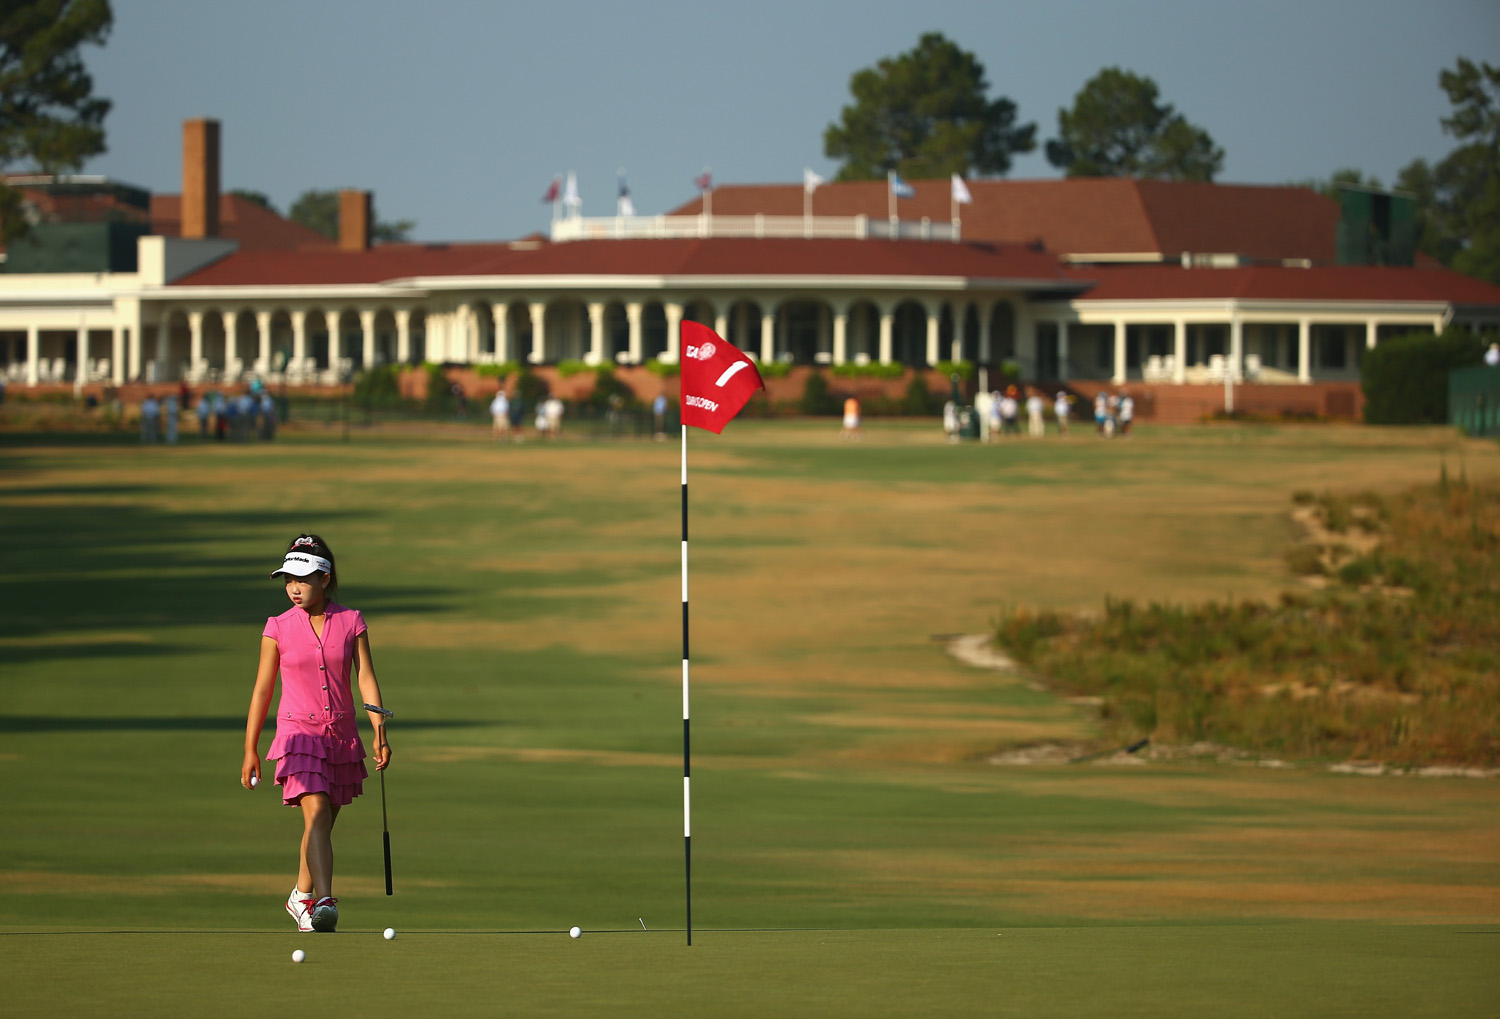 Eleven-year old Amateur Lucy Li of the United States walks on the first green during a practice round prior to the start of the 69th U.S. Women's Open at Pinehurst Resort &amp; Country Club, Course No. 2 in Pinehurst, N.C. on June 18, 2014.